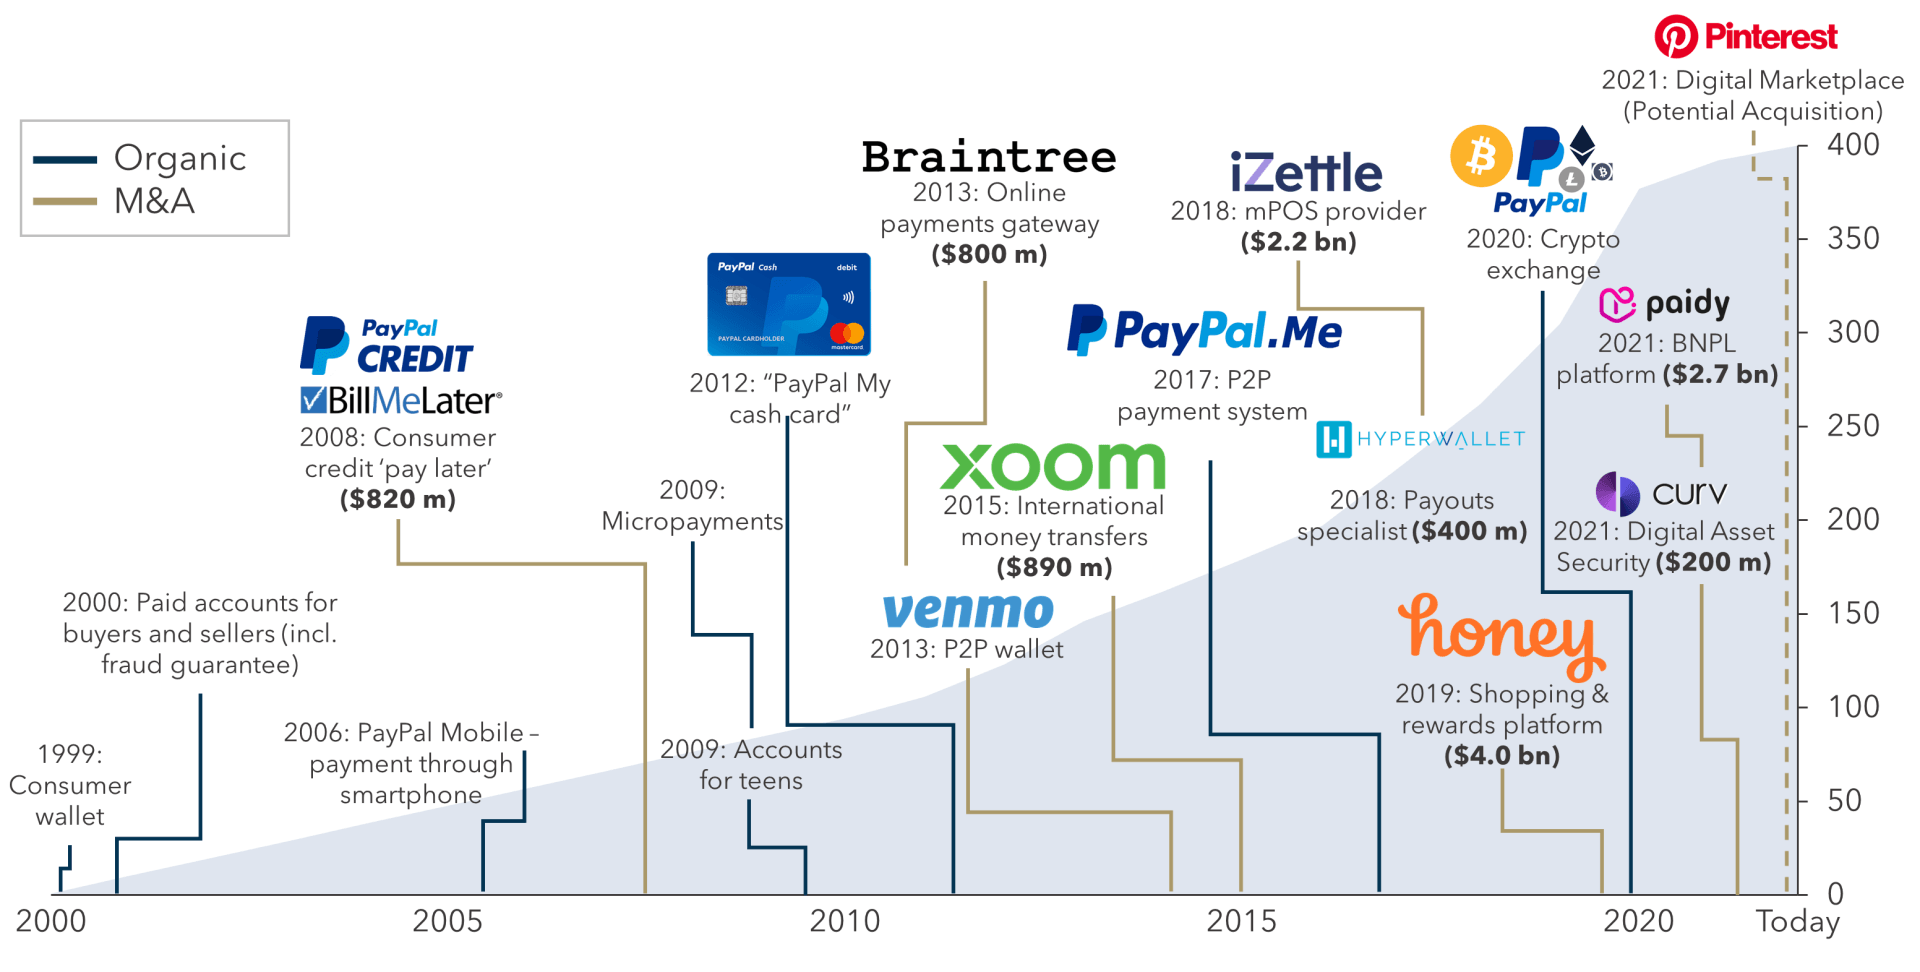 FIGURE 1: PayPal Product Expansion (selected examples; graphic = active user accounts in millions)